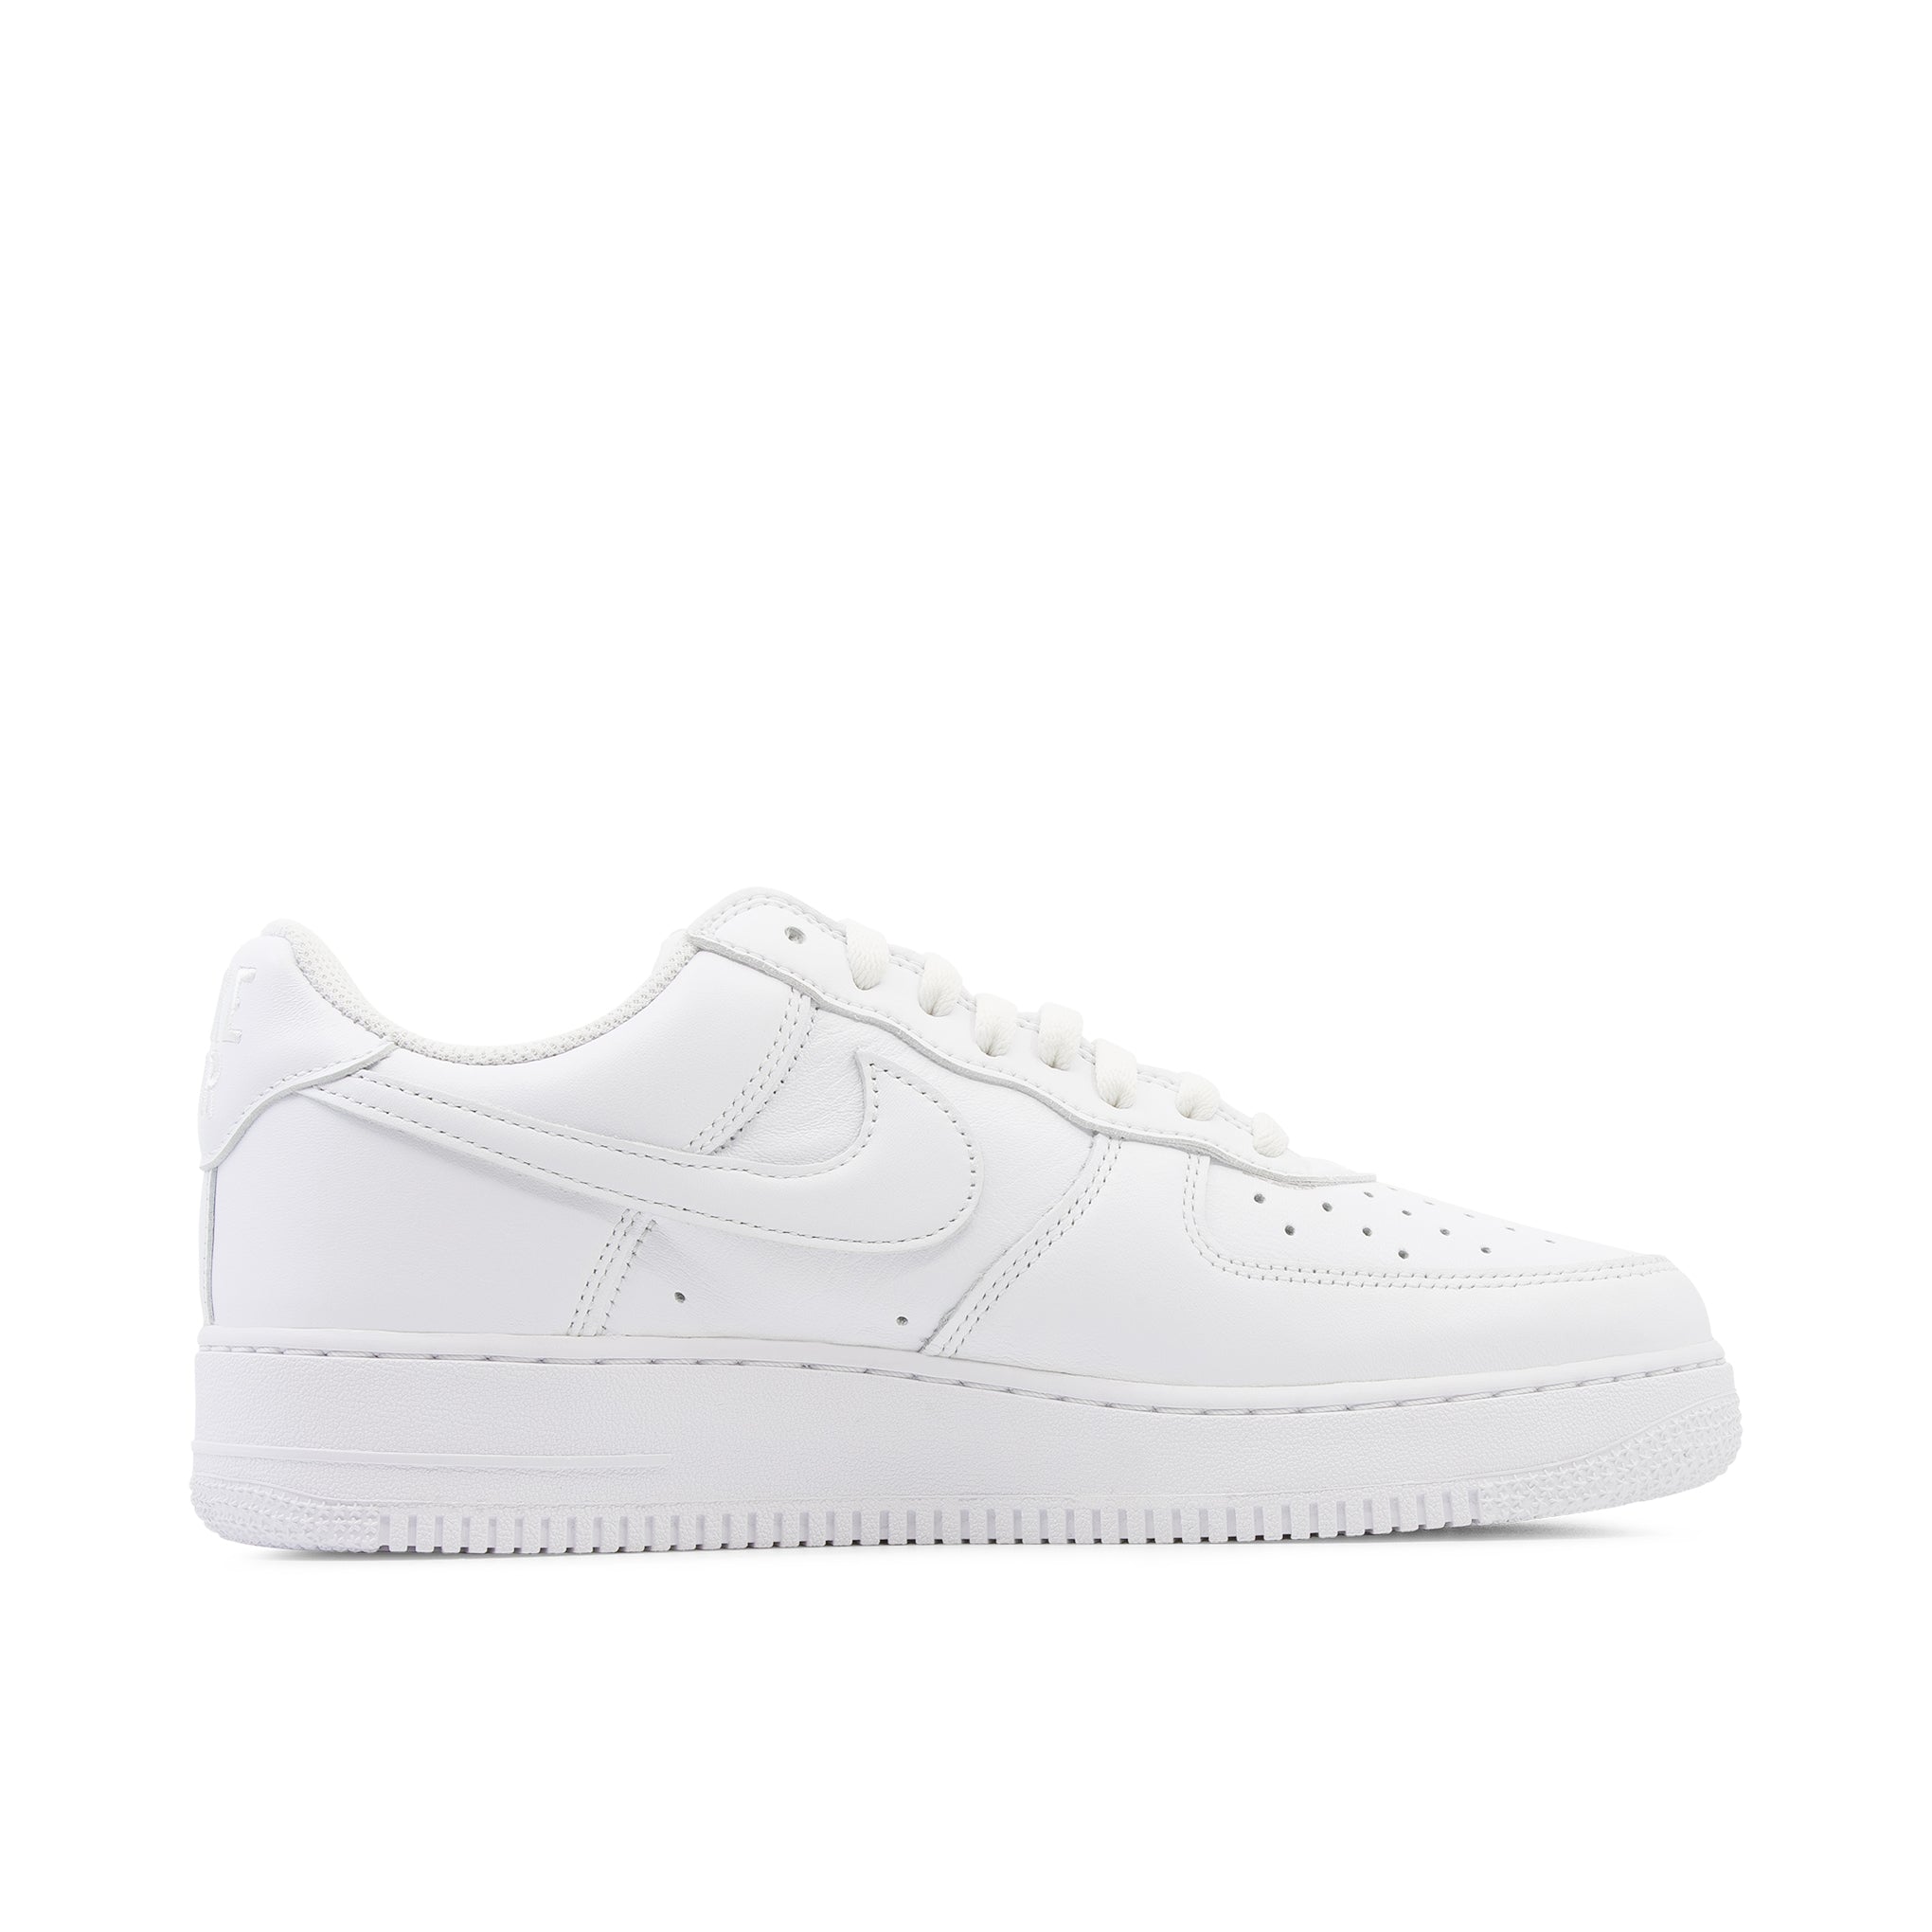 NIKE AIR FORCE 1 LOW COLOR DEL MES BLANCO